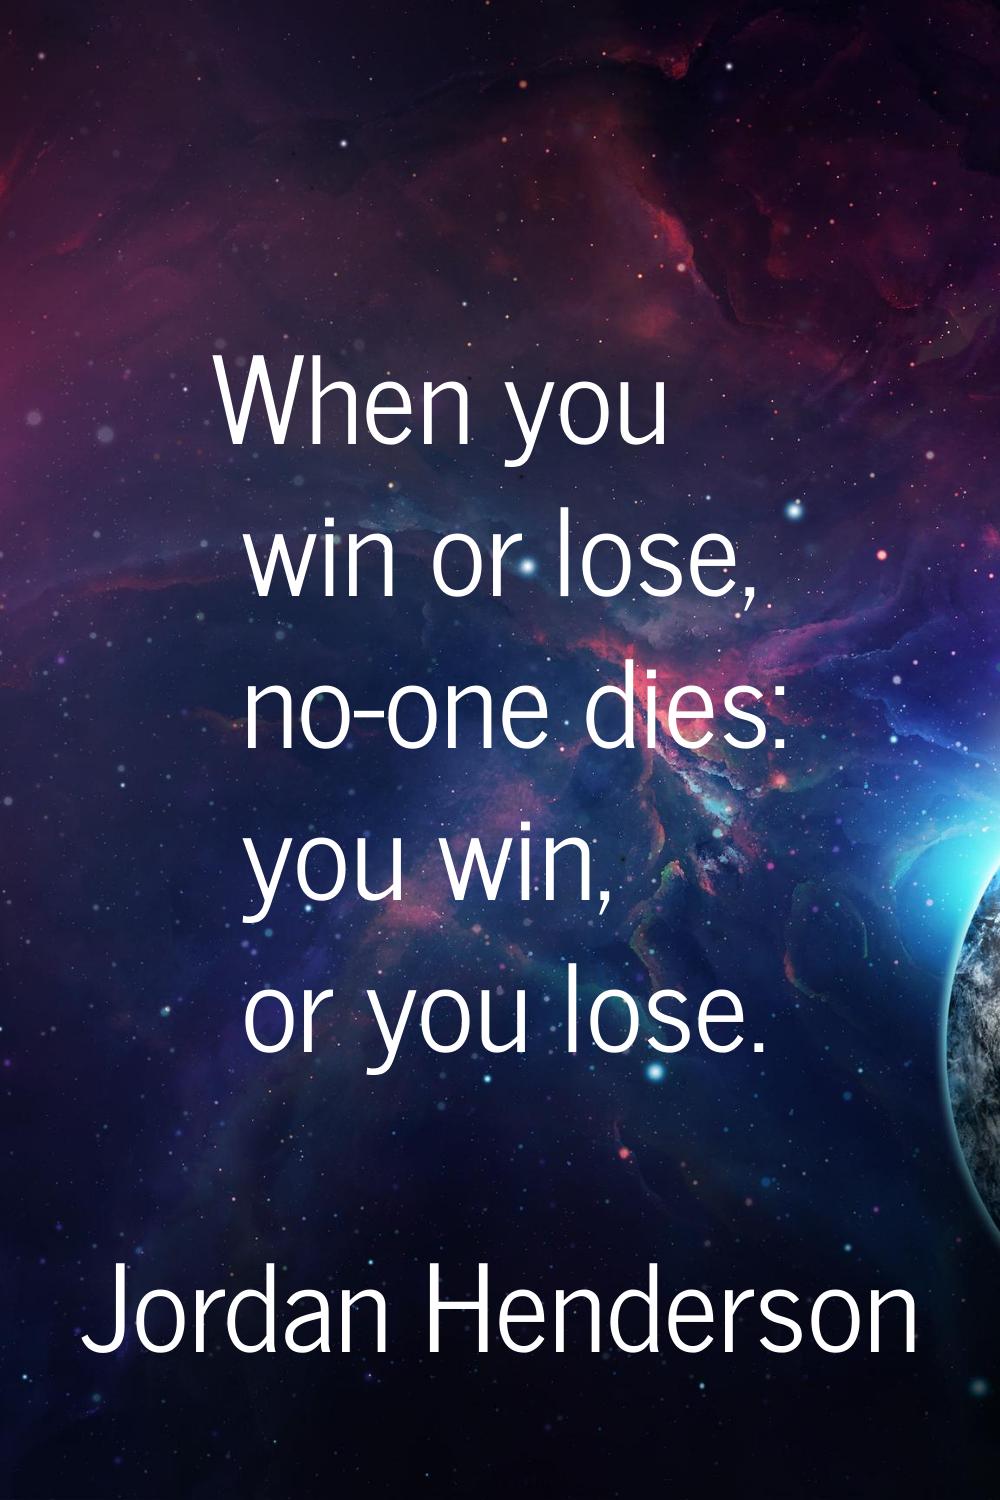 When you win or lose, no-one dies: you win, or you lose.